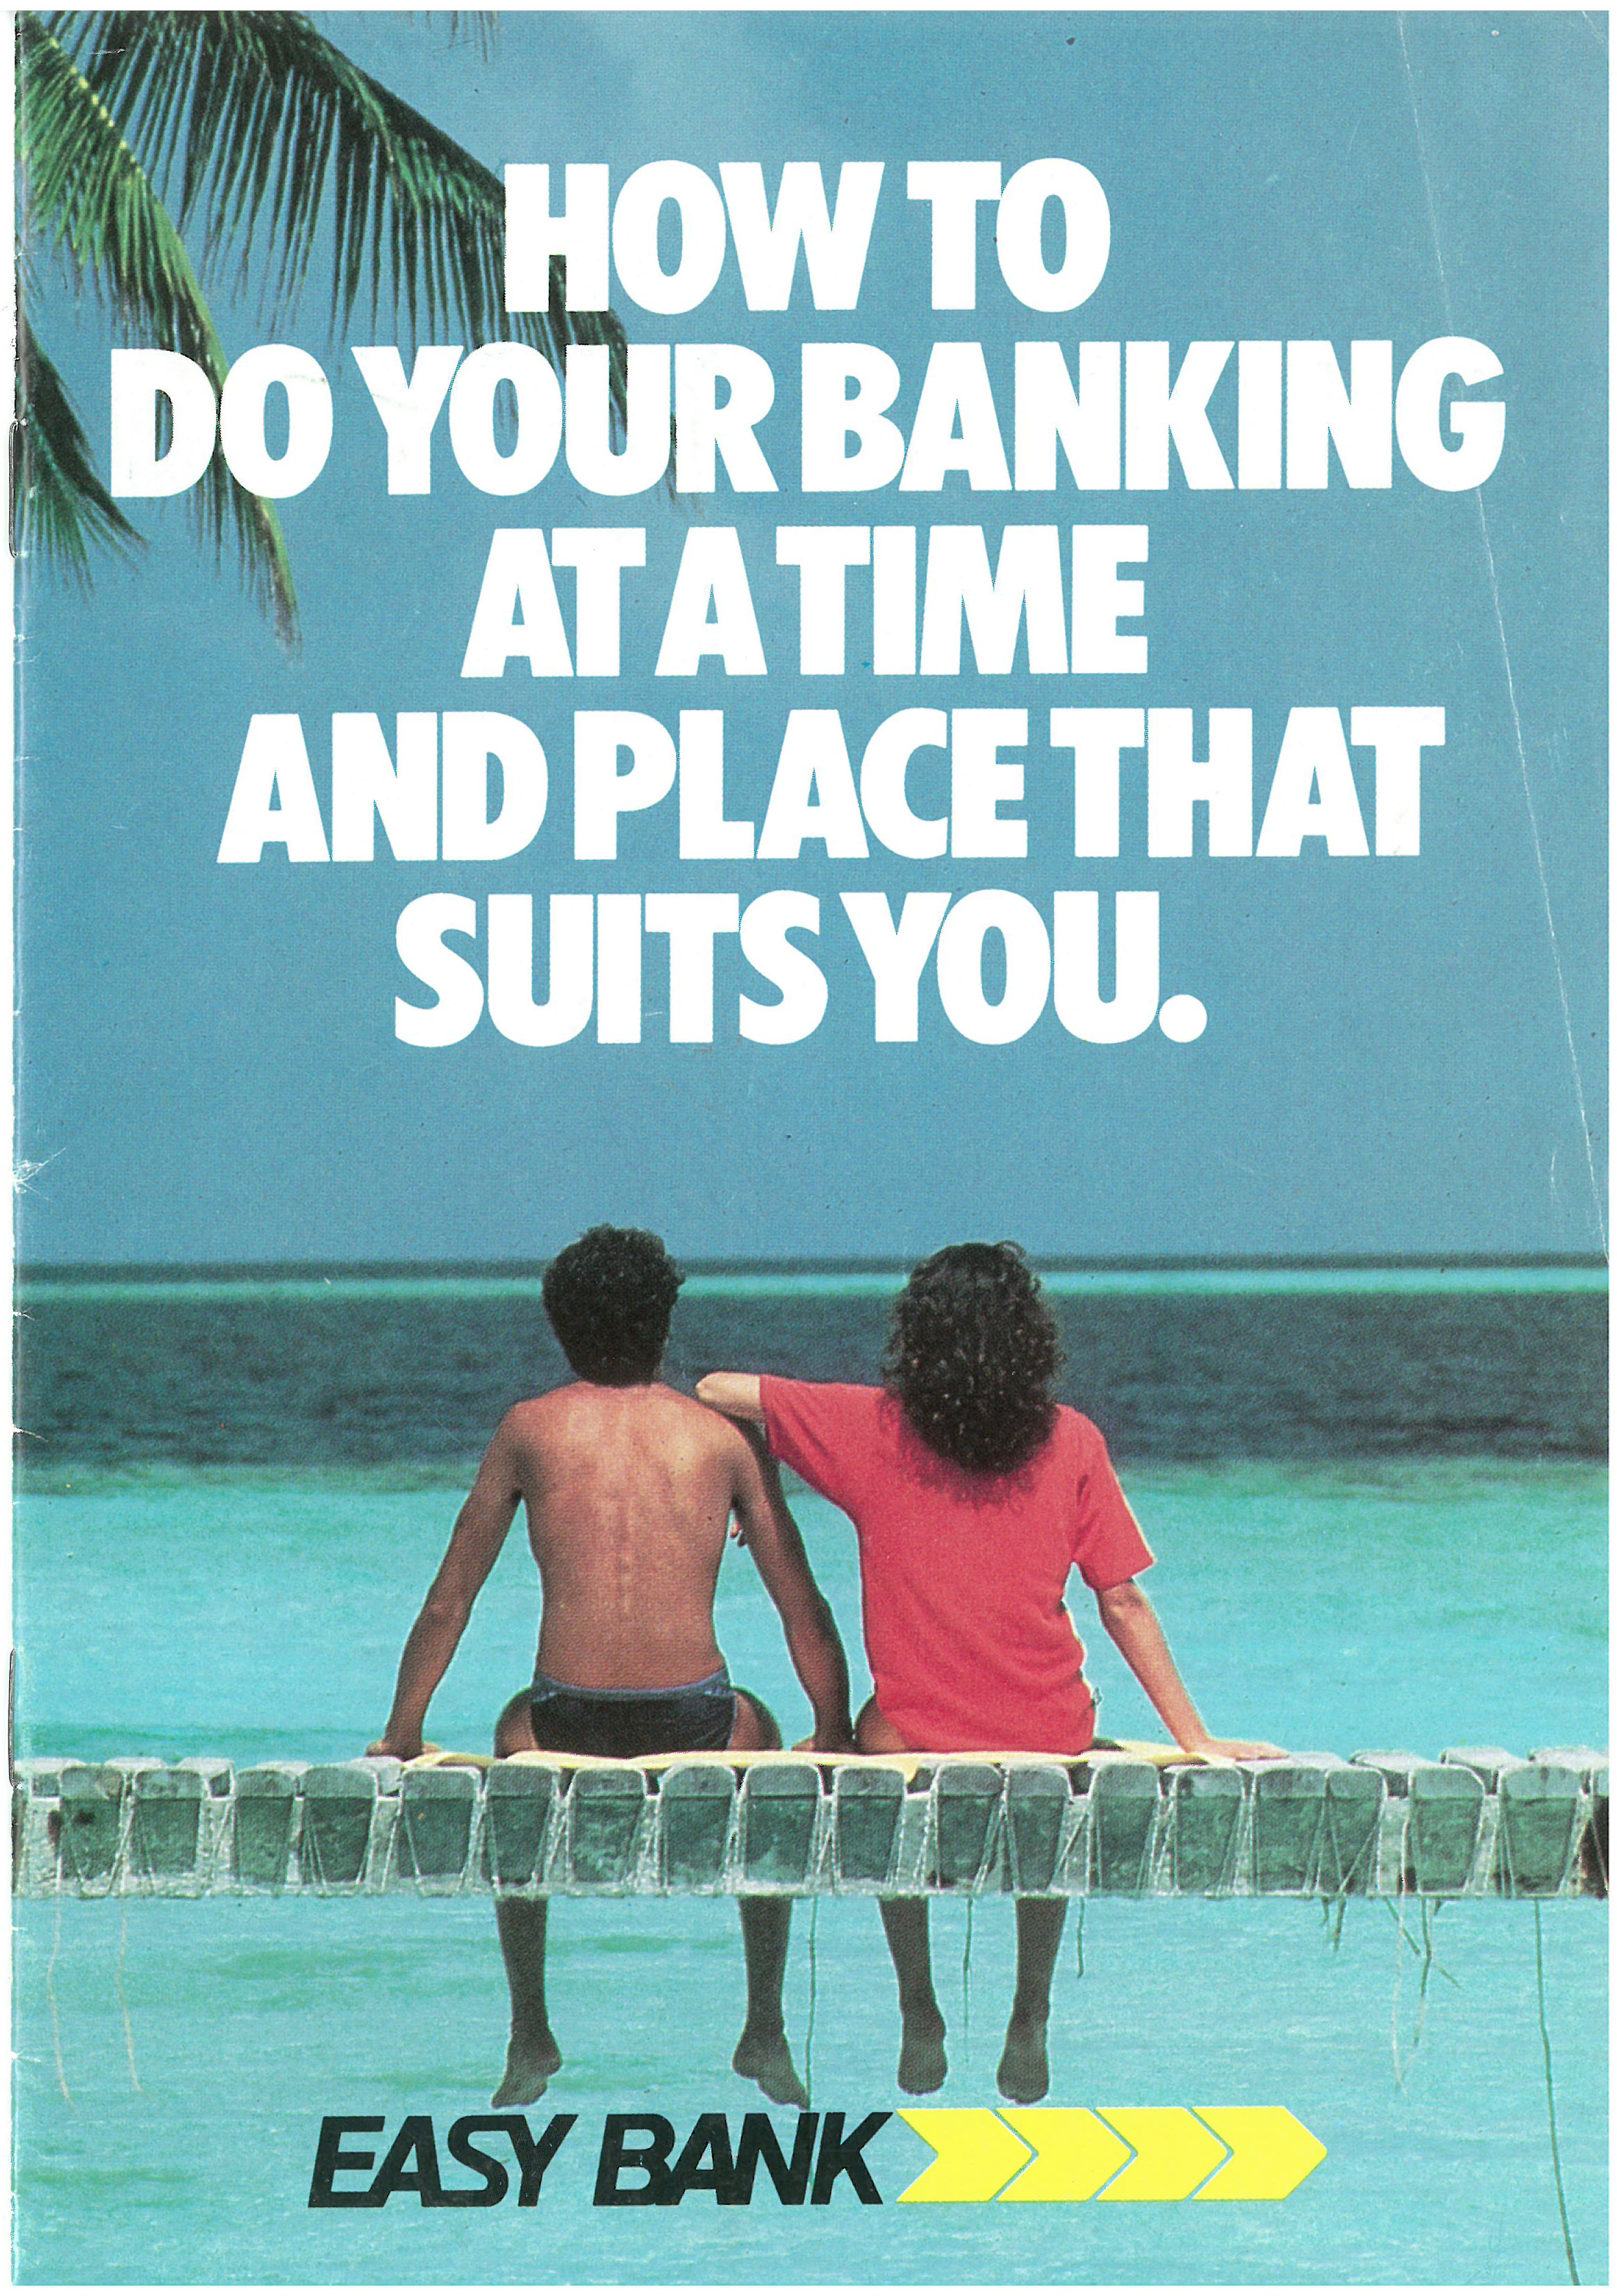 A brochure about easy banking from 1986